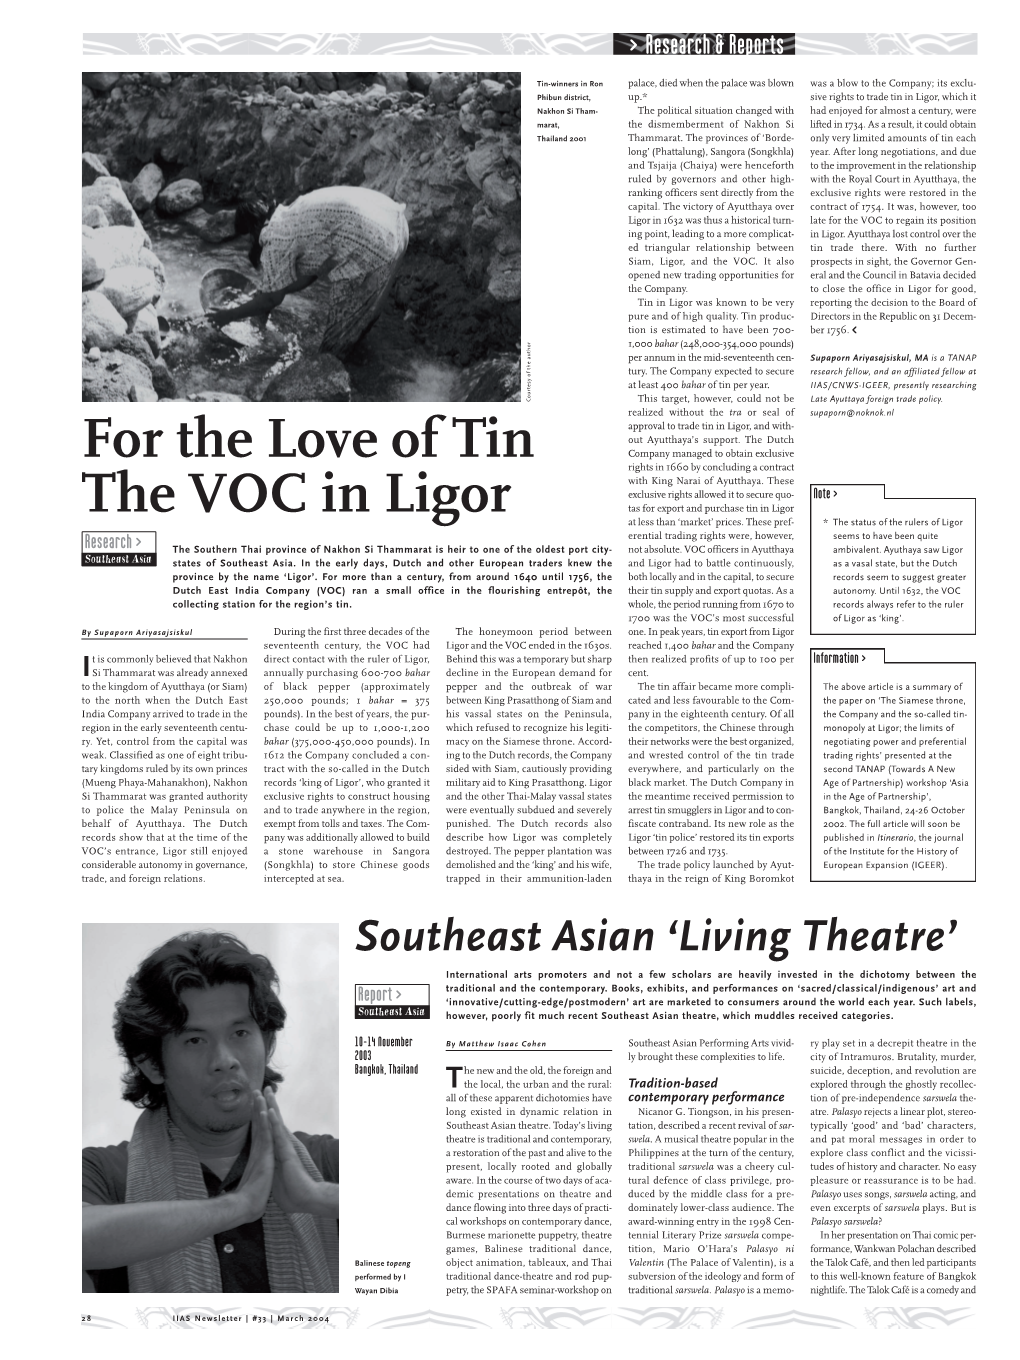 For the Love of Tin: the VOC in Ligor